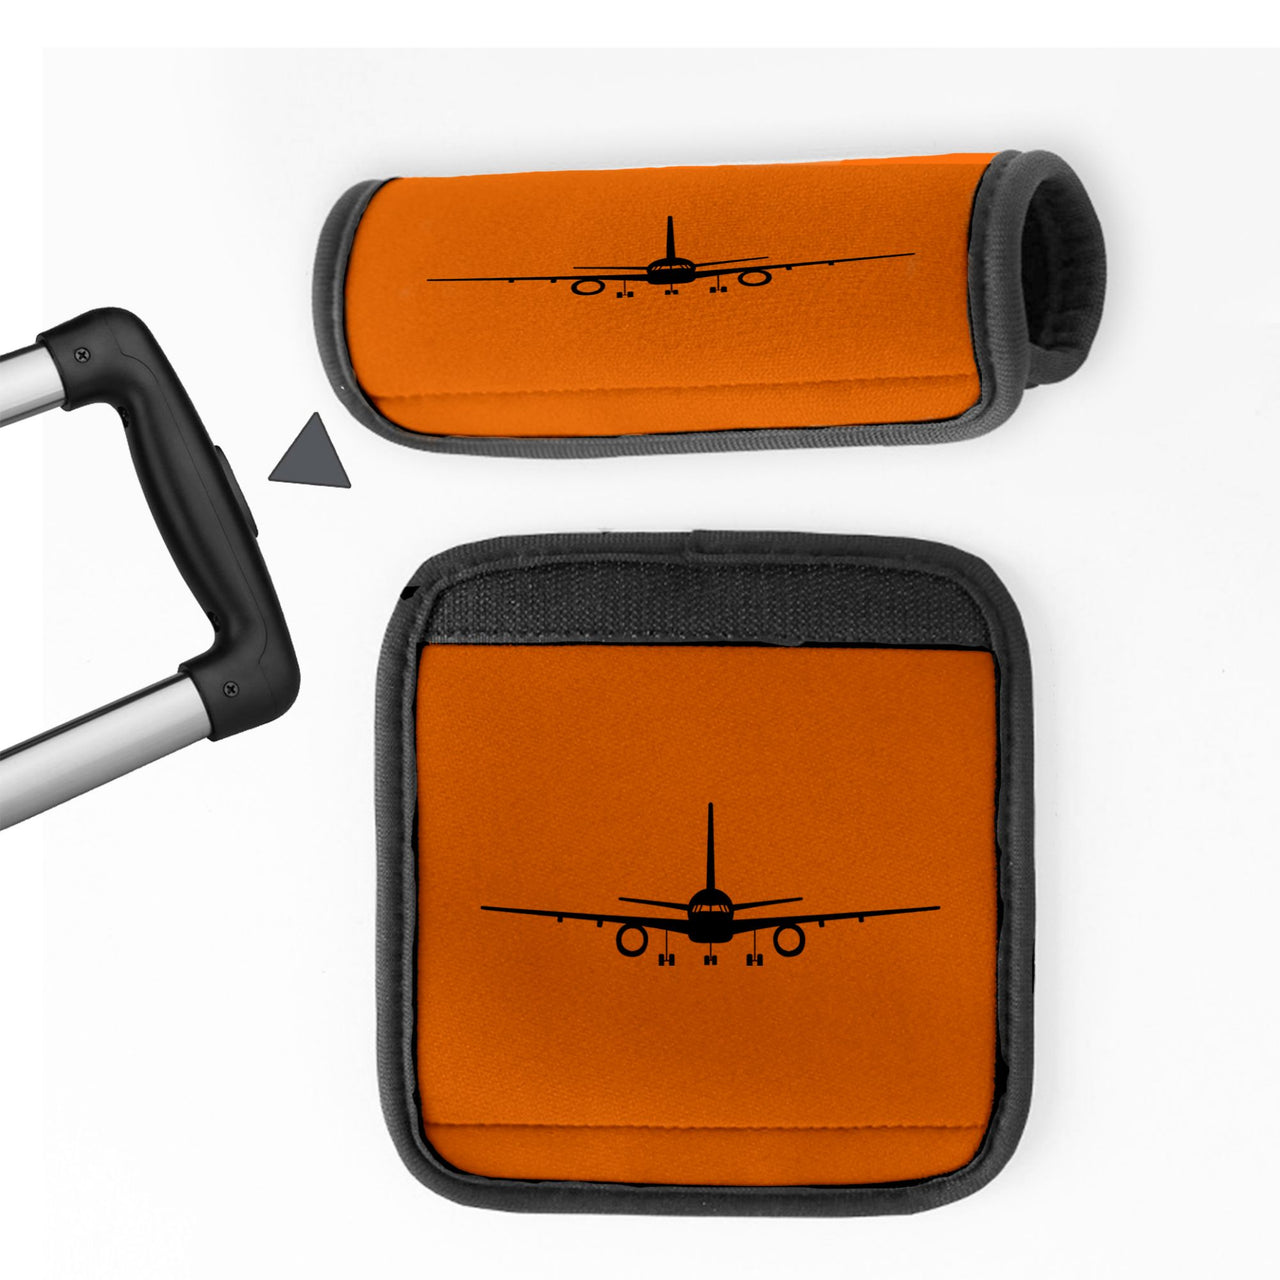 Boeing 757 Silhouette Designed Neoprene Luggage Handle Covers